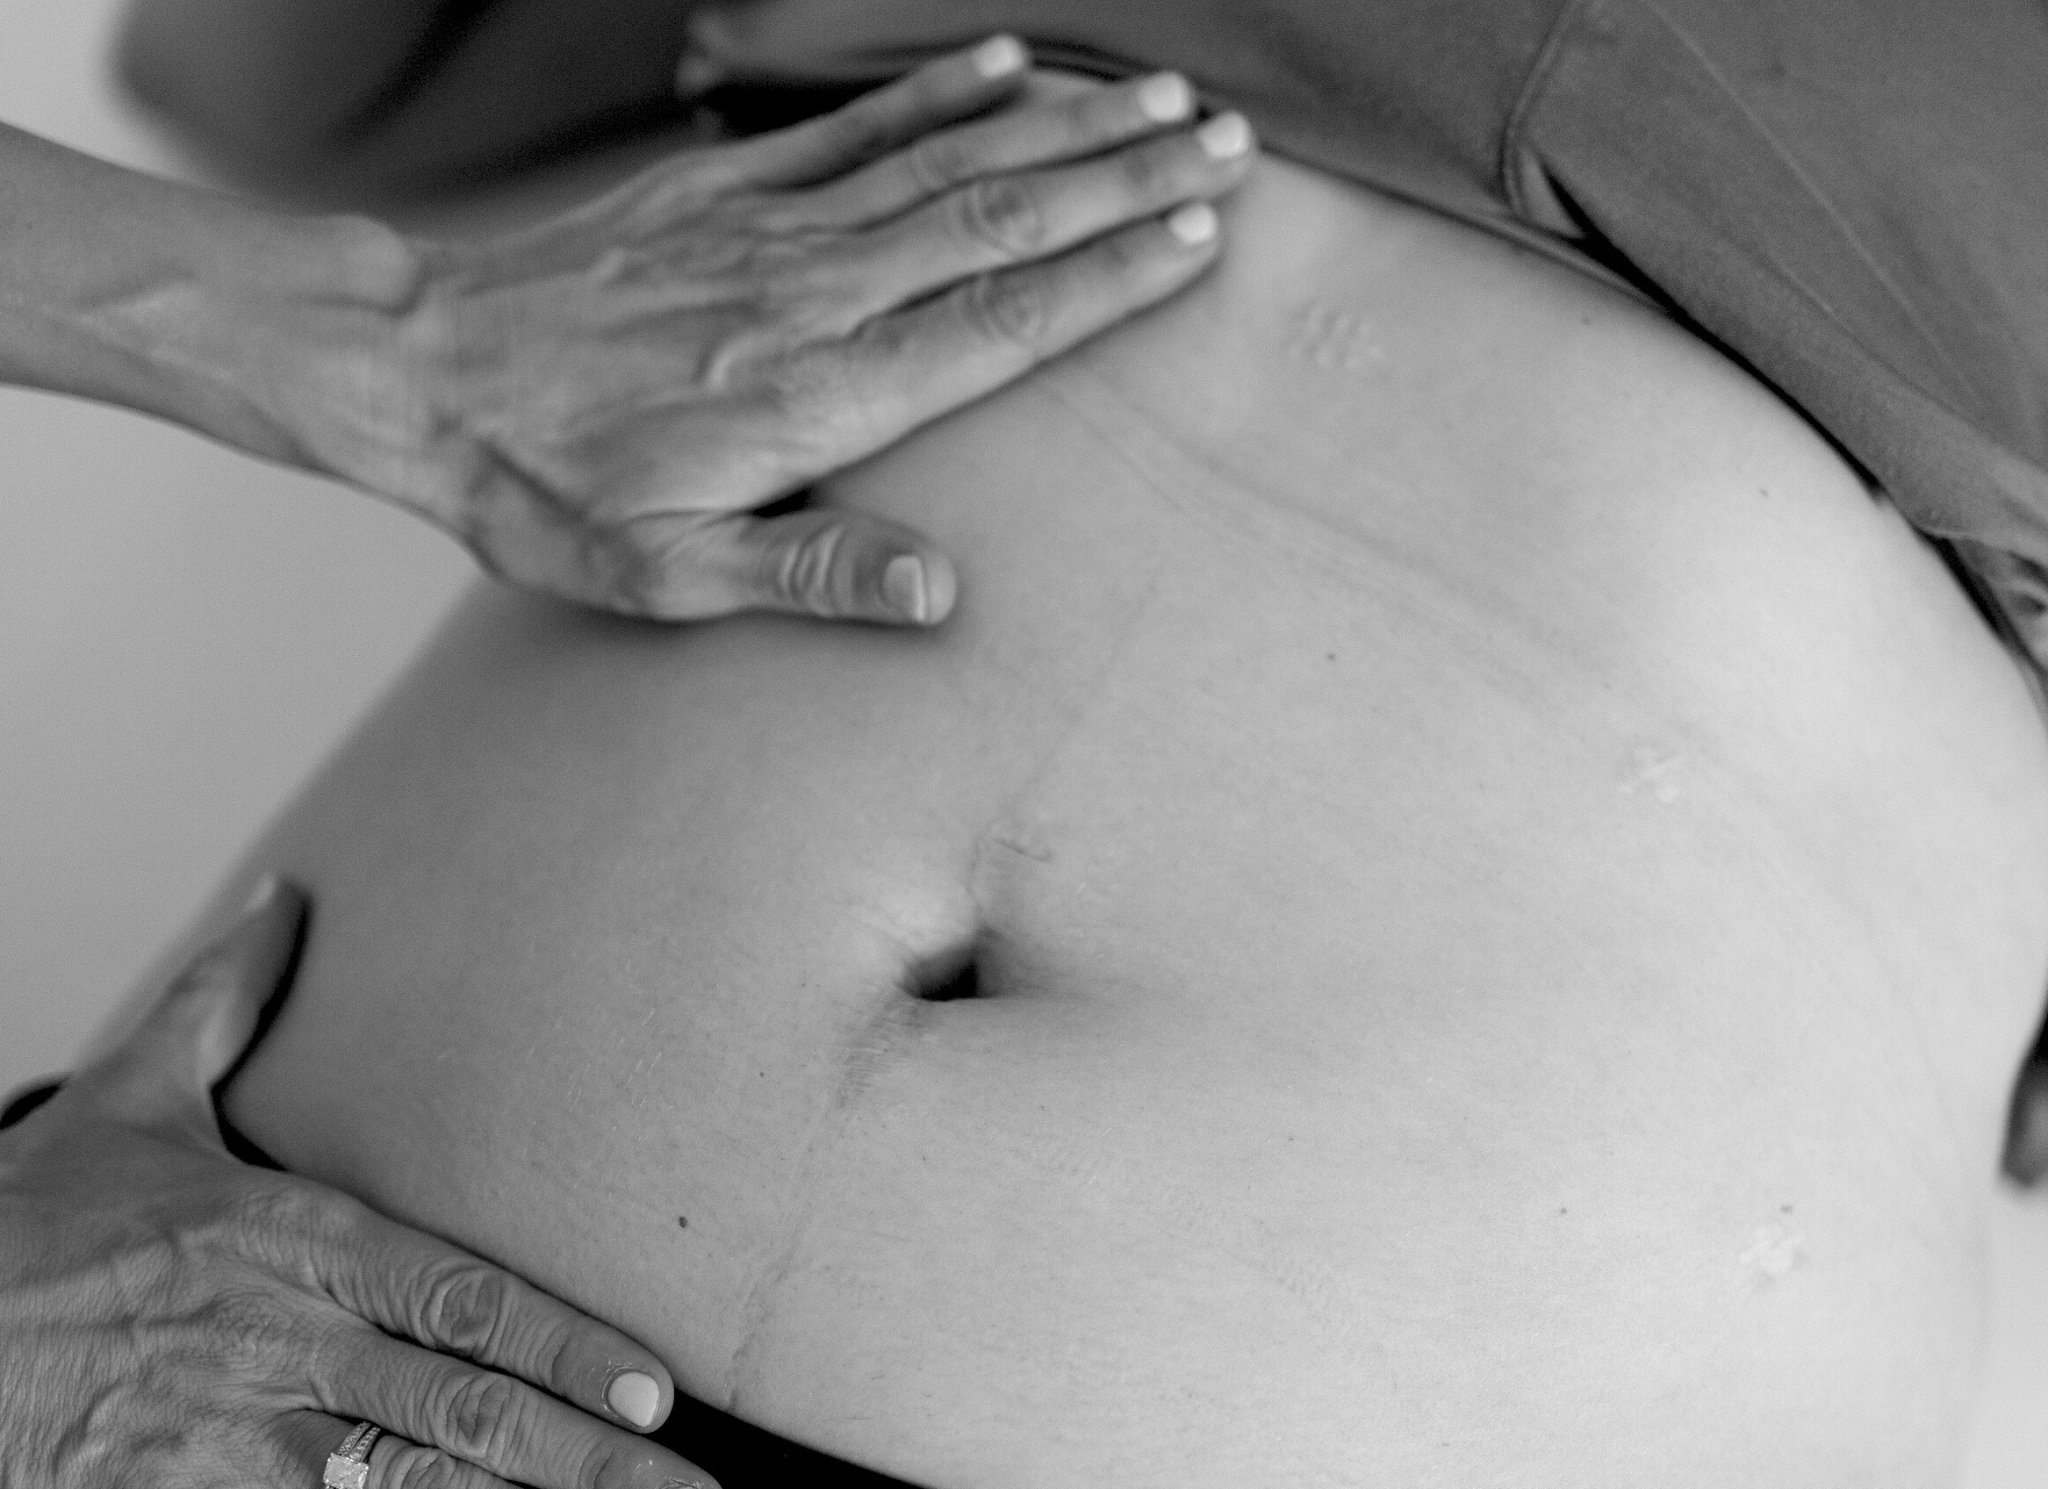 closeup of a woman's stomach, a PTs hands are placed on top of her ribs and her hip bones. You can see scars consistent with endometriosis surgery on her abdomen